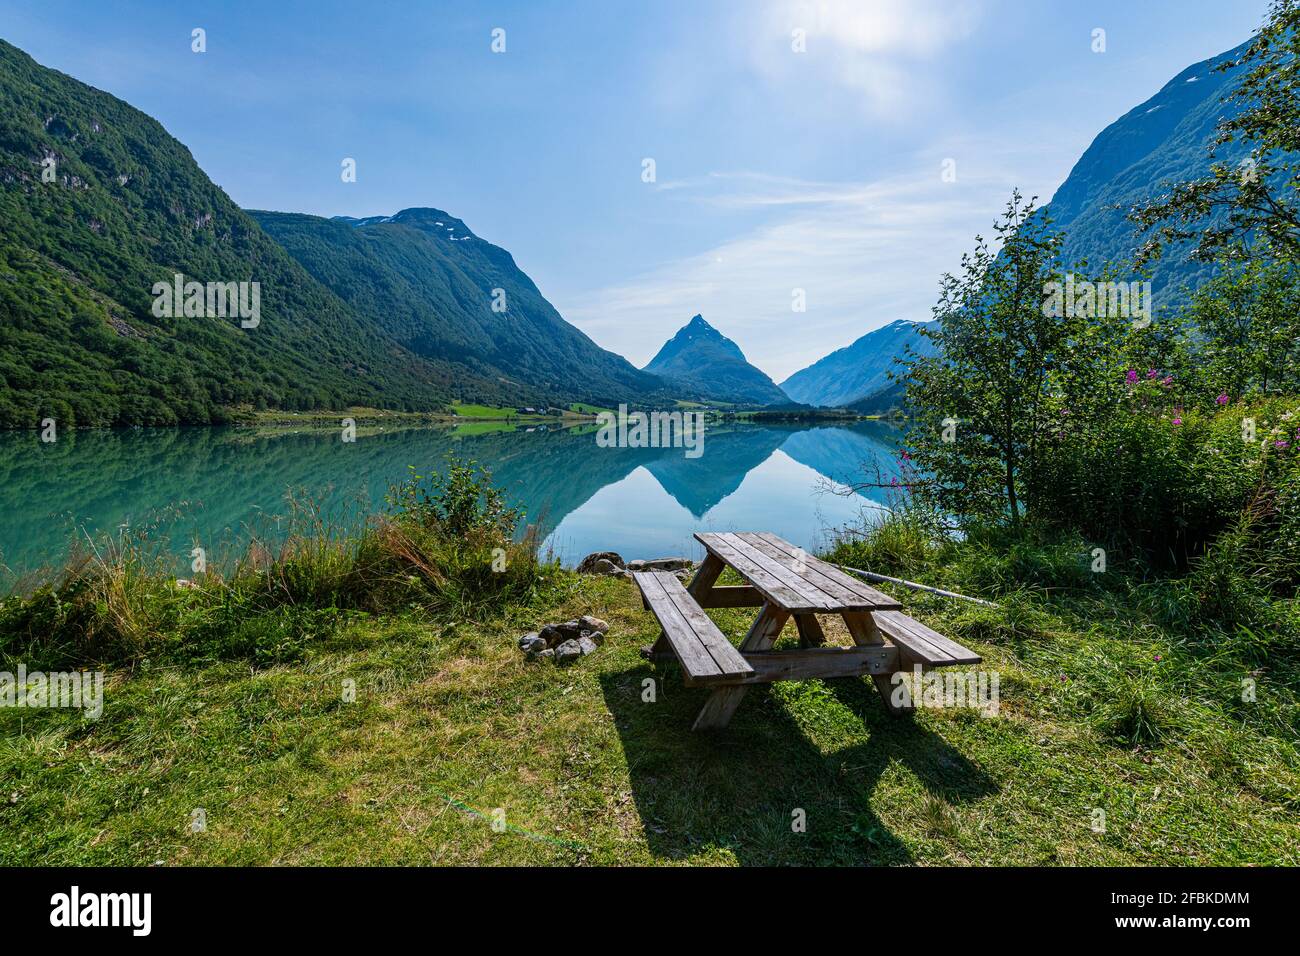 Norway, Byrkjelo, Picnic bench over Bergheimsvatnet lake in mountains Stock Photo